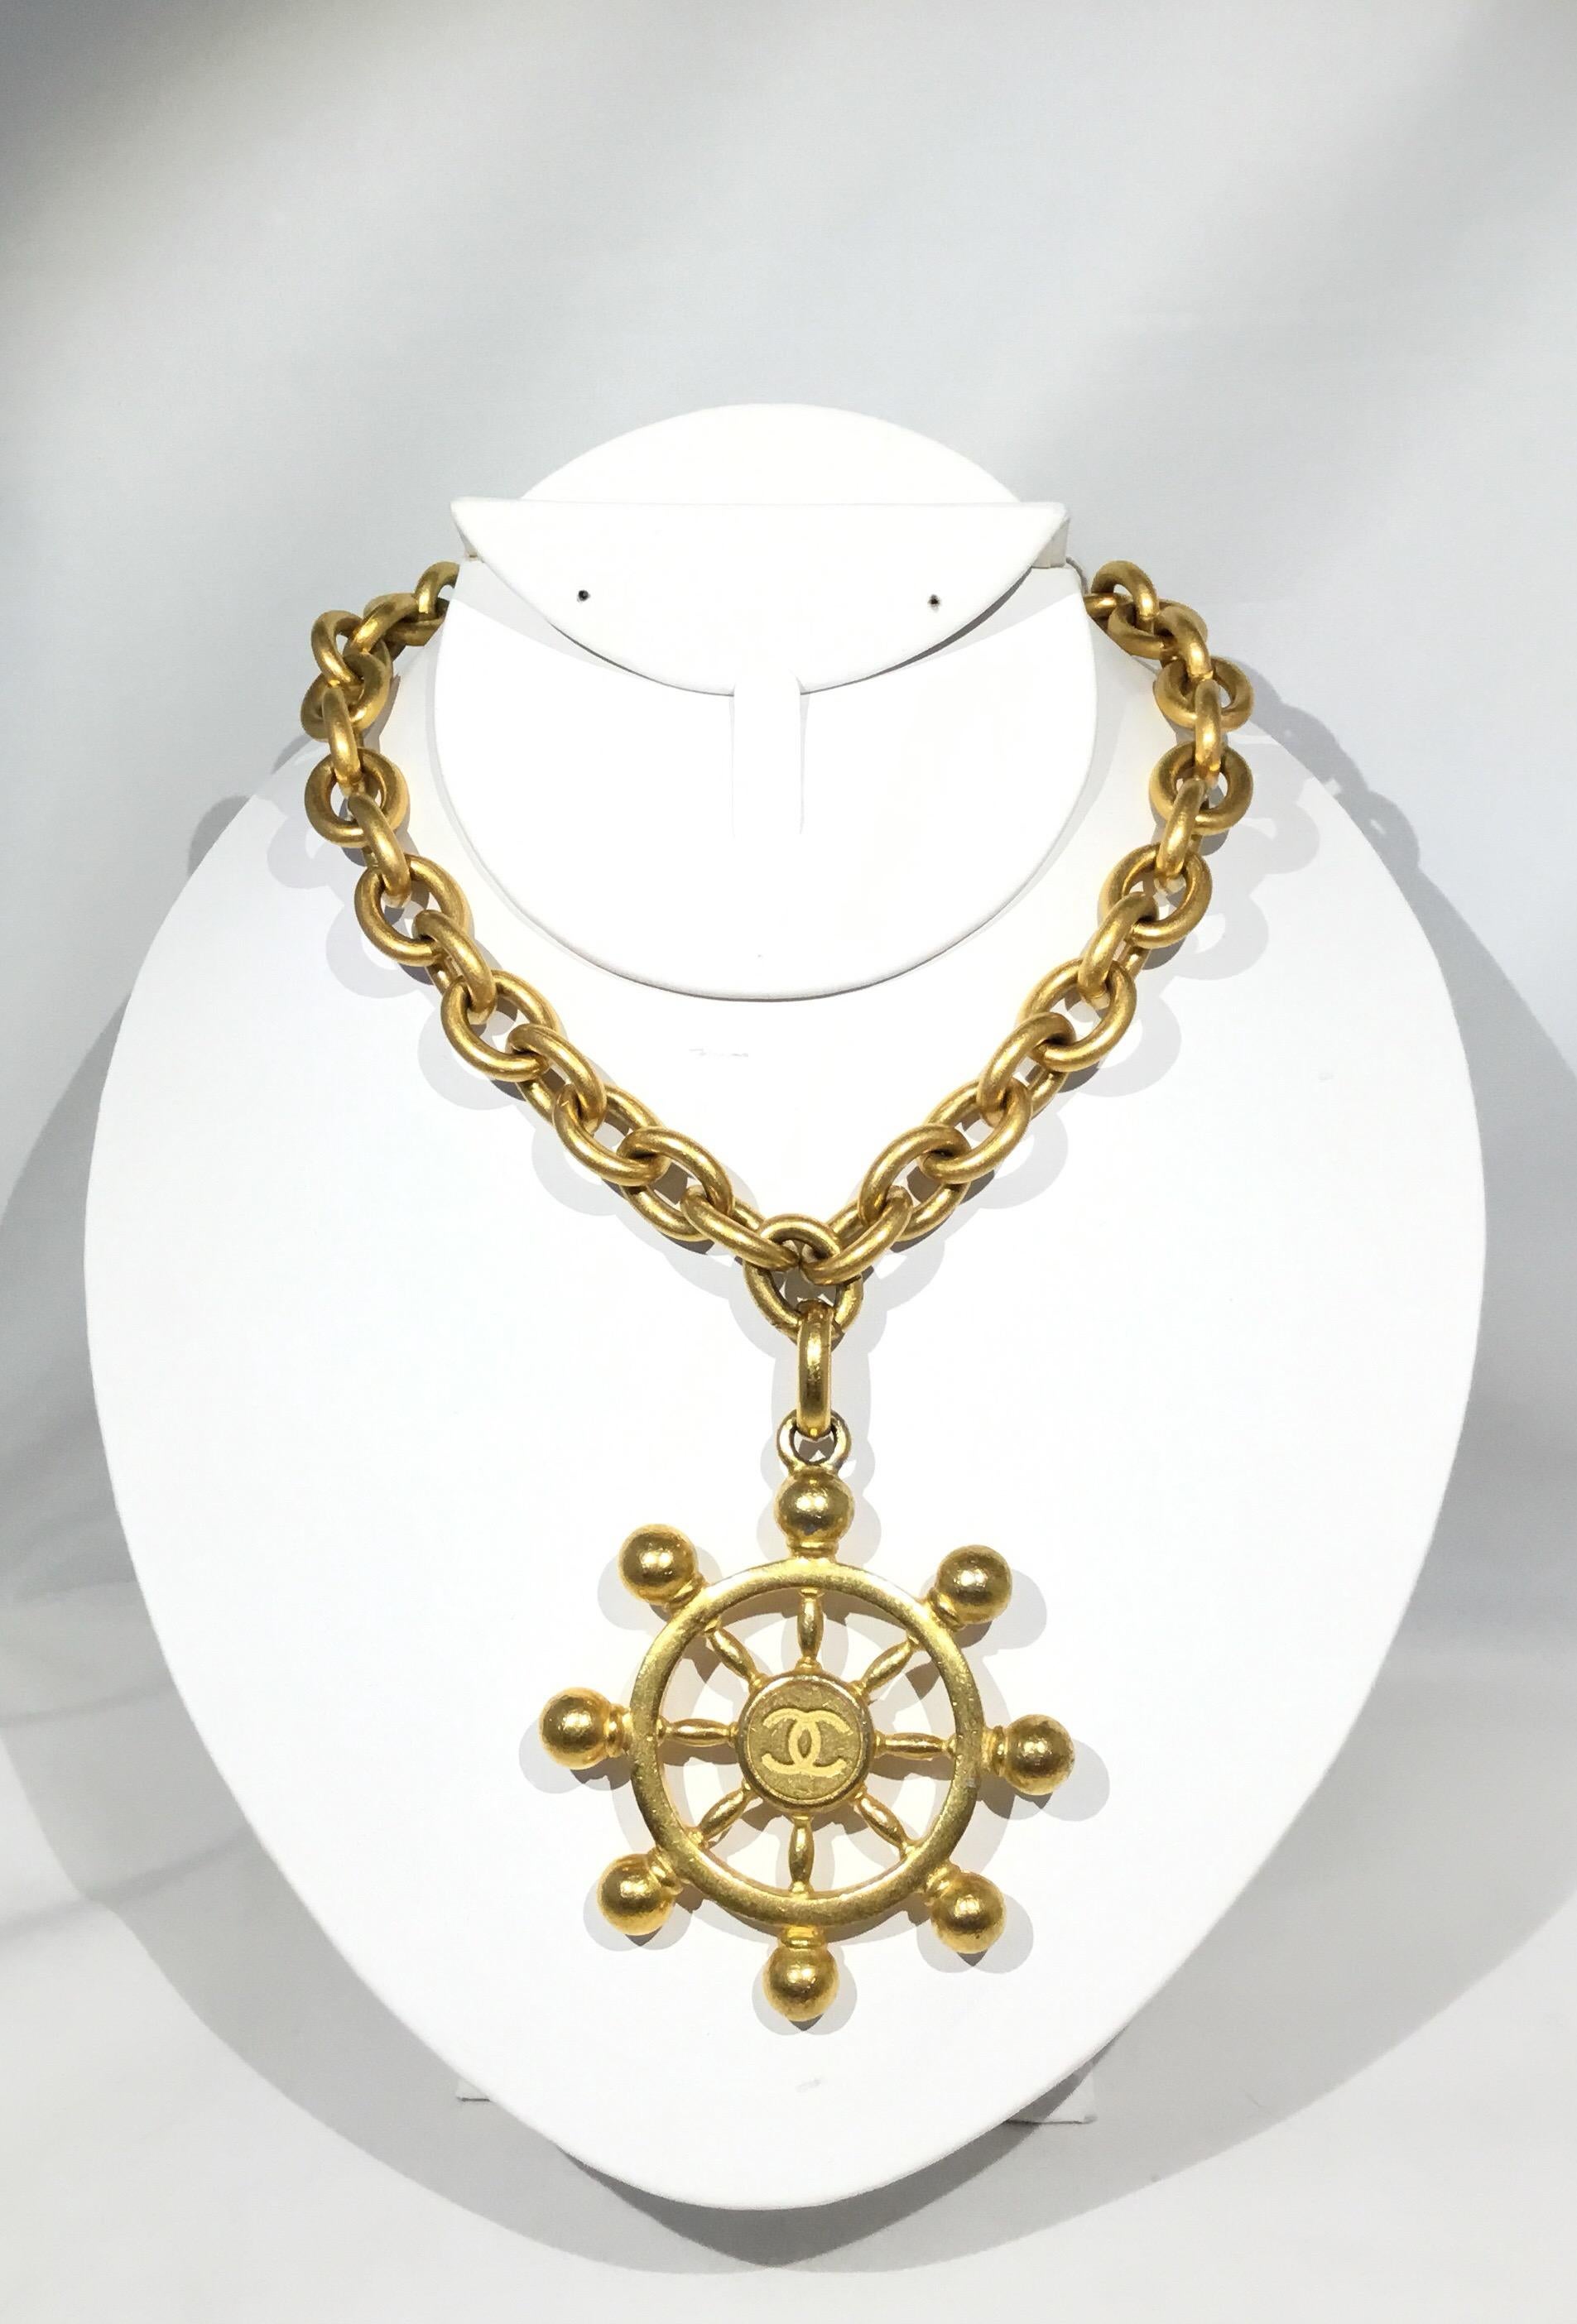 Vintage Chanel chain necklace featured in gold tone from the 1994 P collection. Necklace has a boat/ship wheel (with CC insignia at the center) Pendant and a hook closure. Can be worn as a necklace or belt. Chain measures 30” 

Made in France